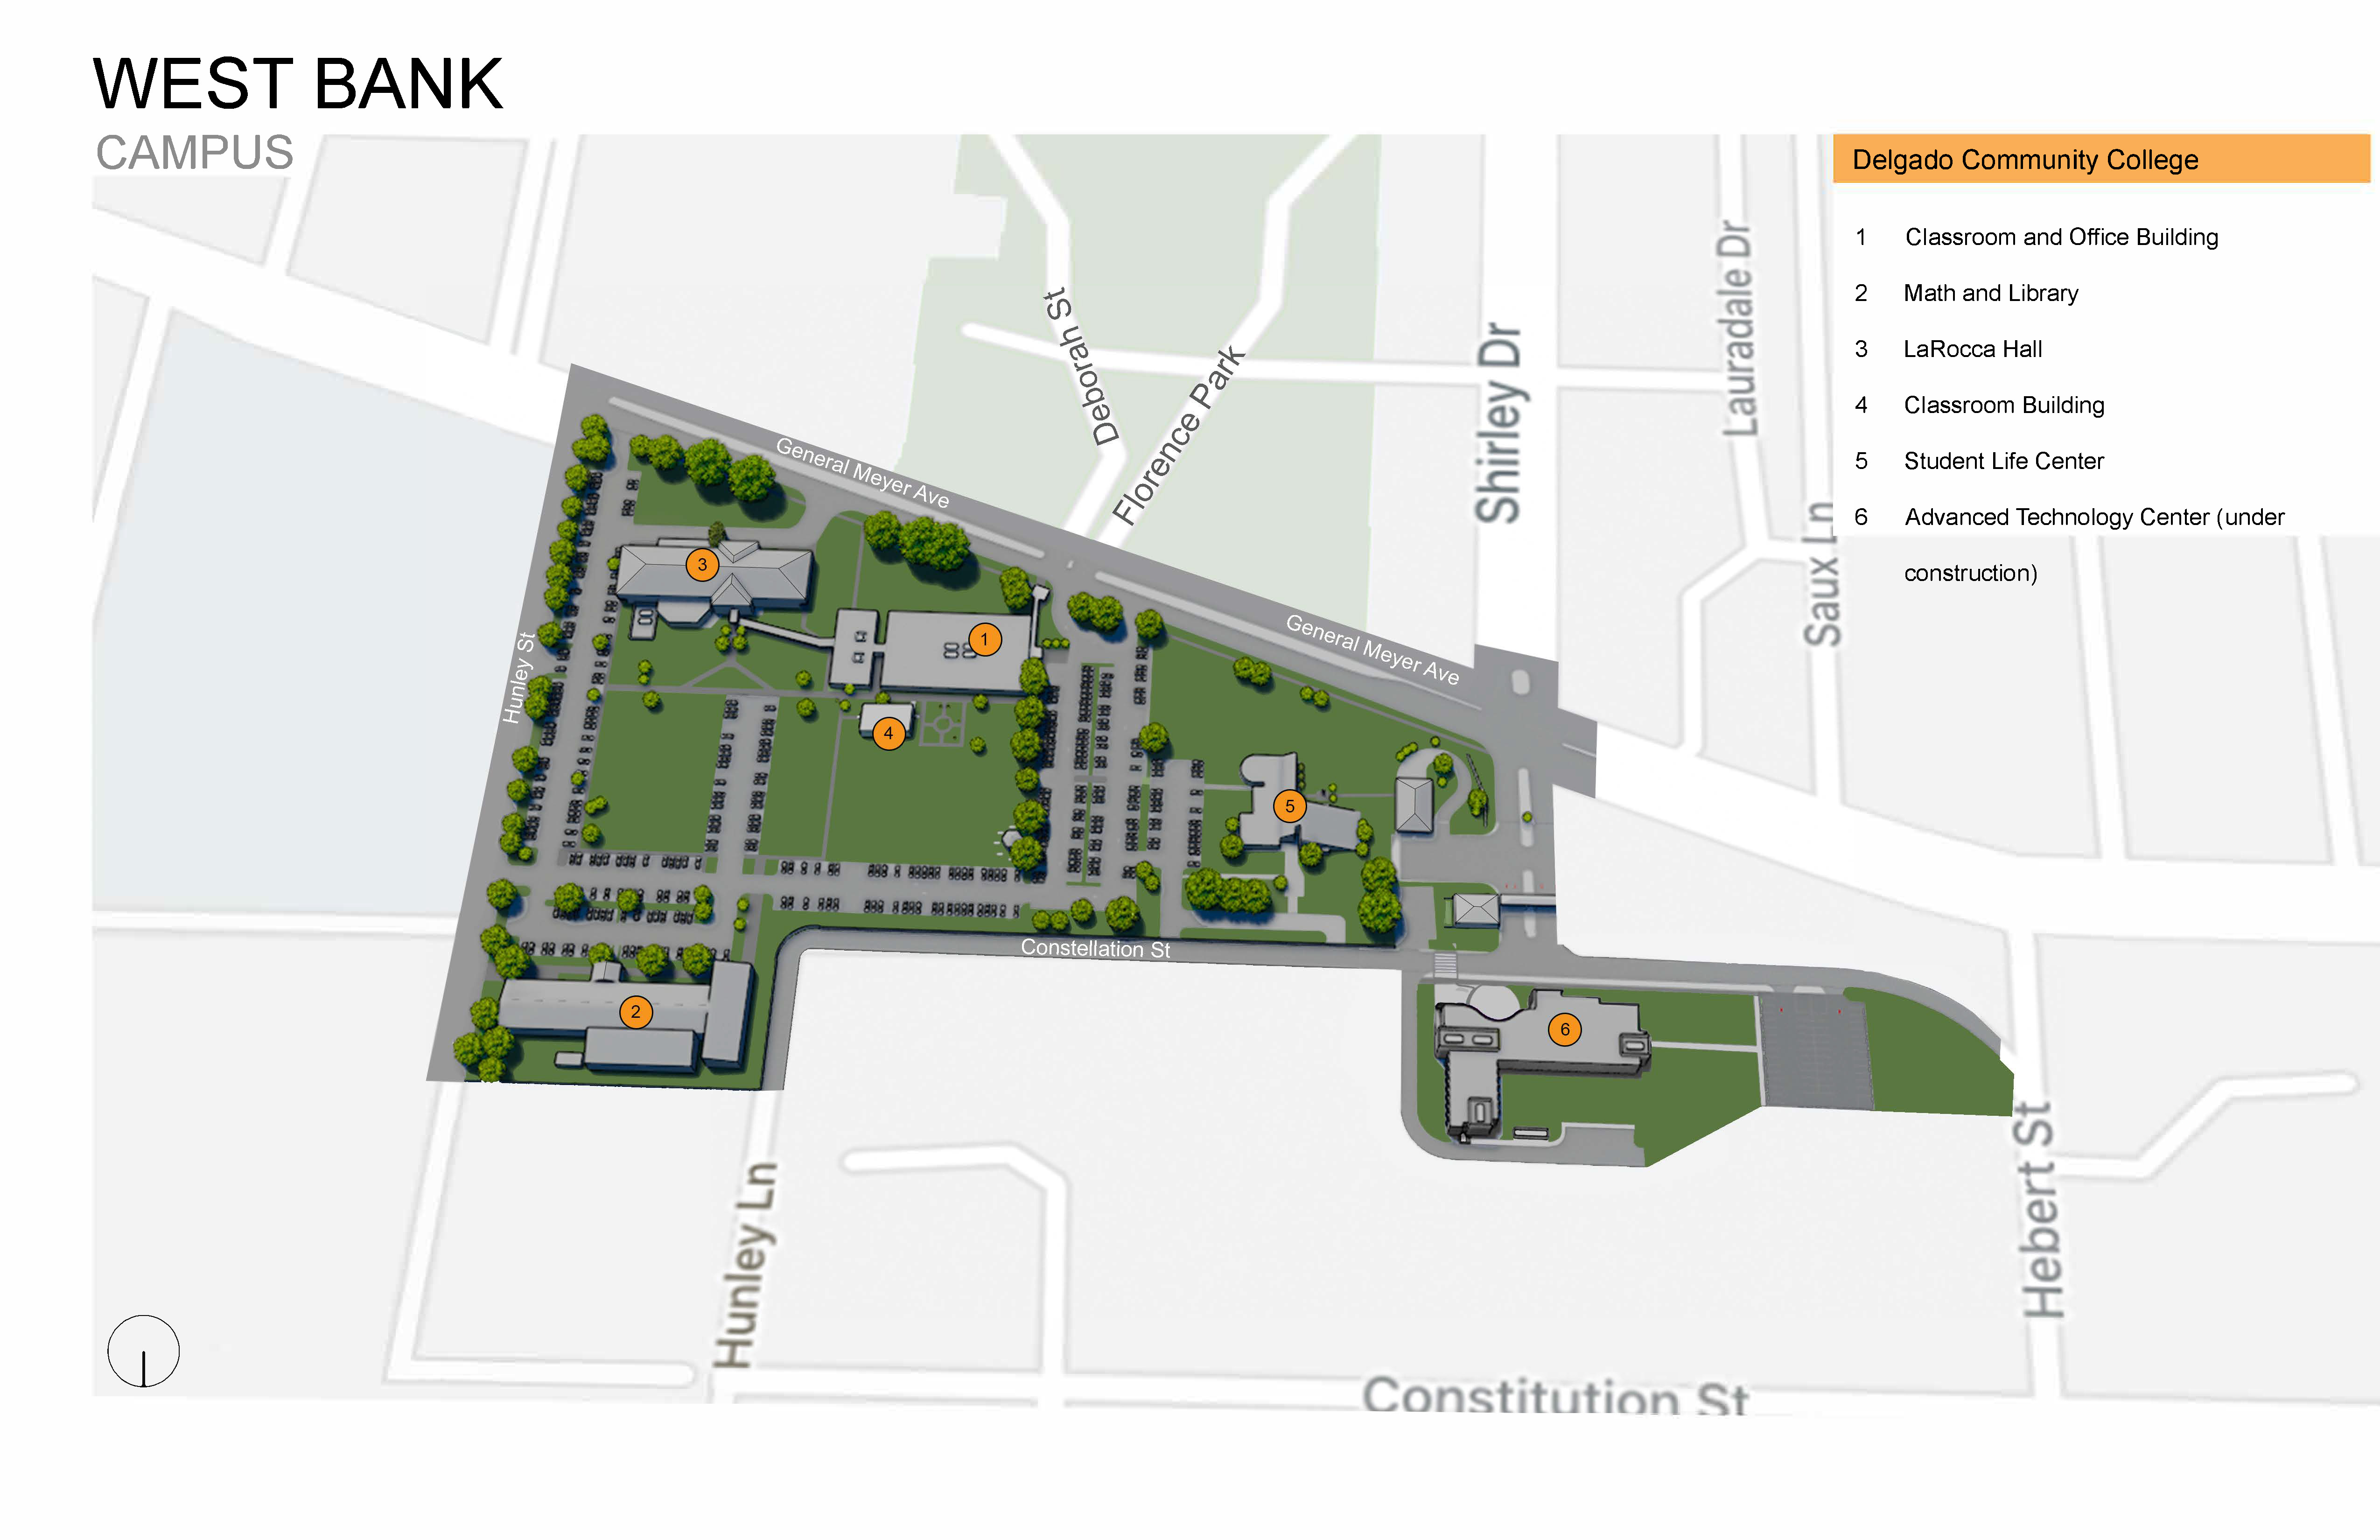 West Bank Campus map